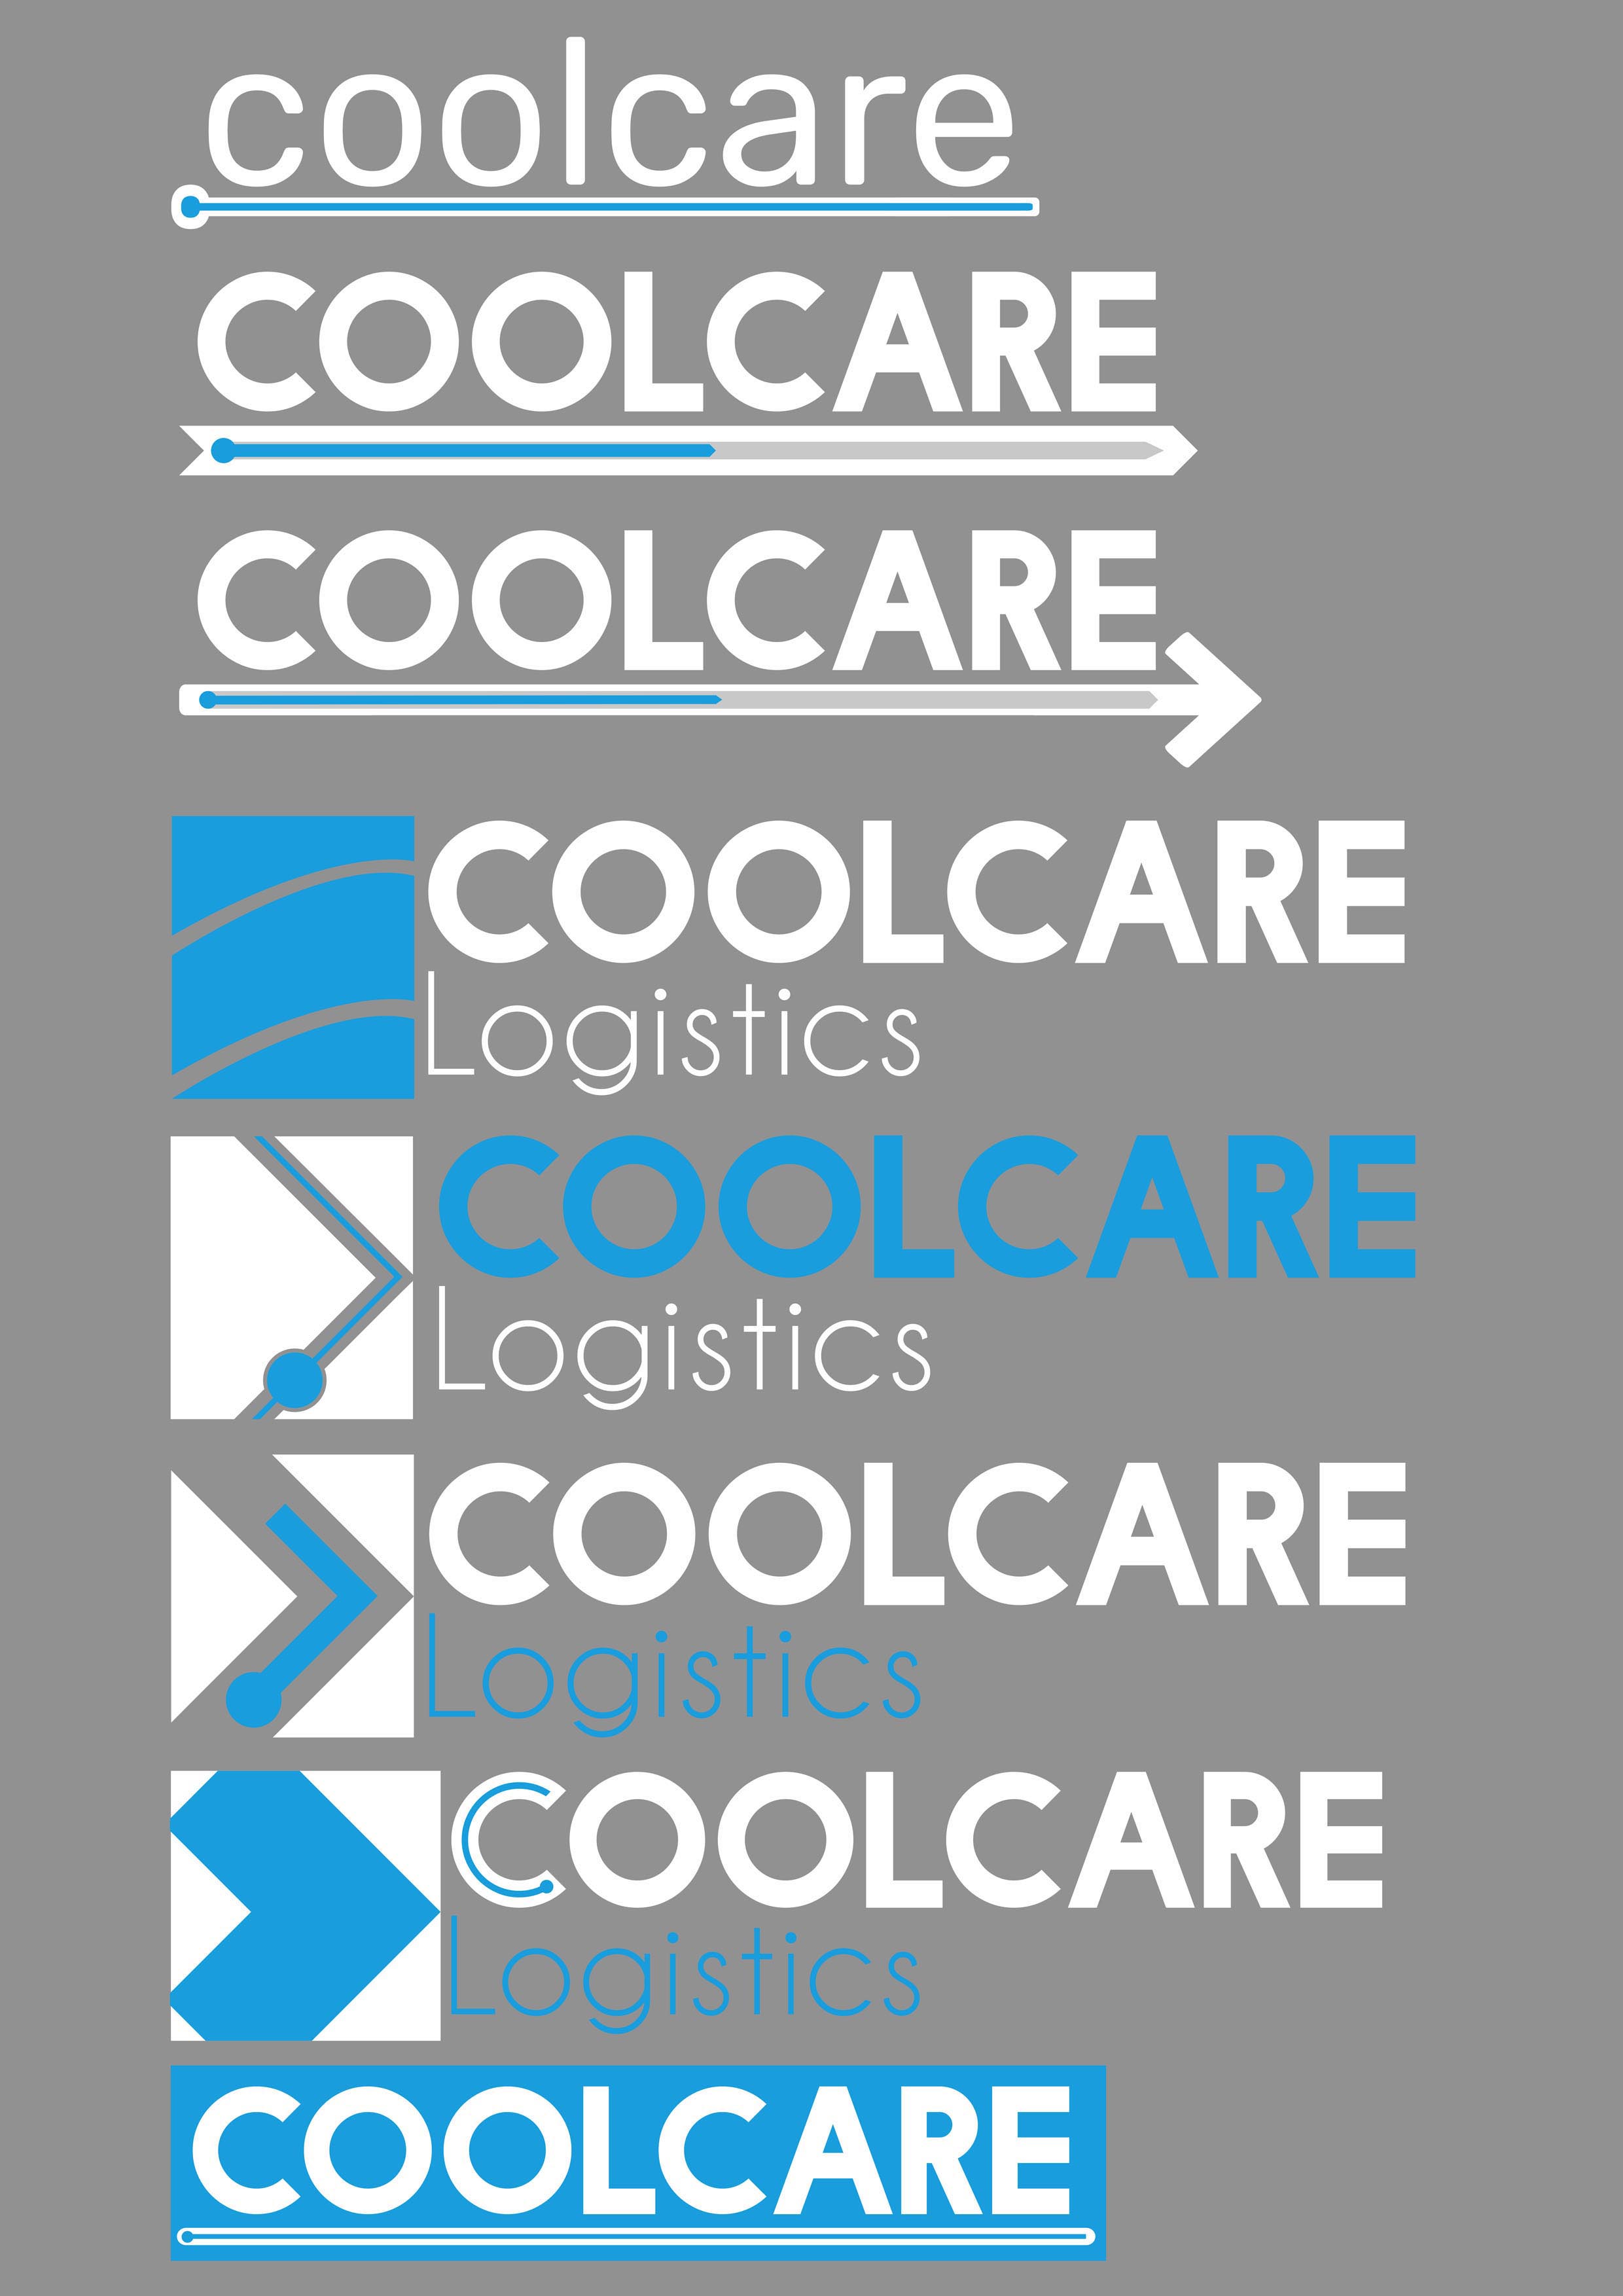 Various vector logos for CoolCare Logistics, using mid-blue and white.